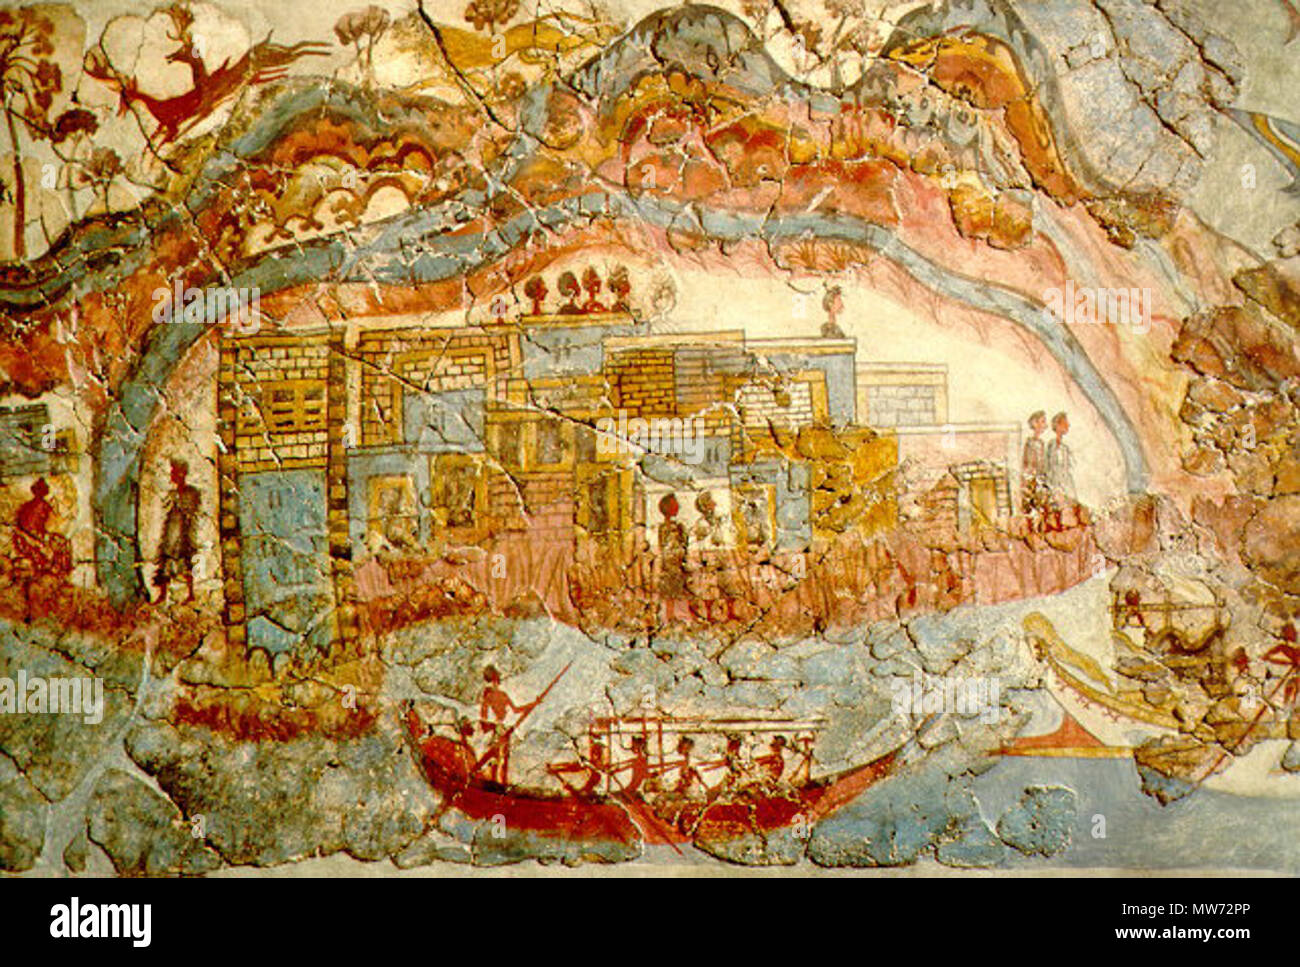 . fresco from the bronze age excavation of Akrotiri, Santorini, Greece. This image shows a cycladic town and boats in its harbour. ~ 1600 B.C.. unknown minoan artist 31 Akrotiri minoan town Stock Photo